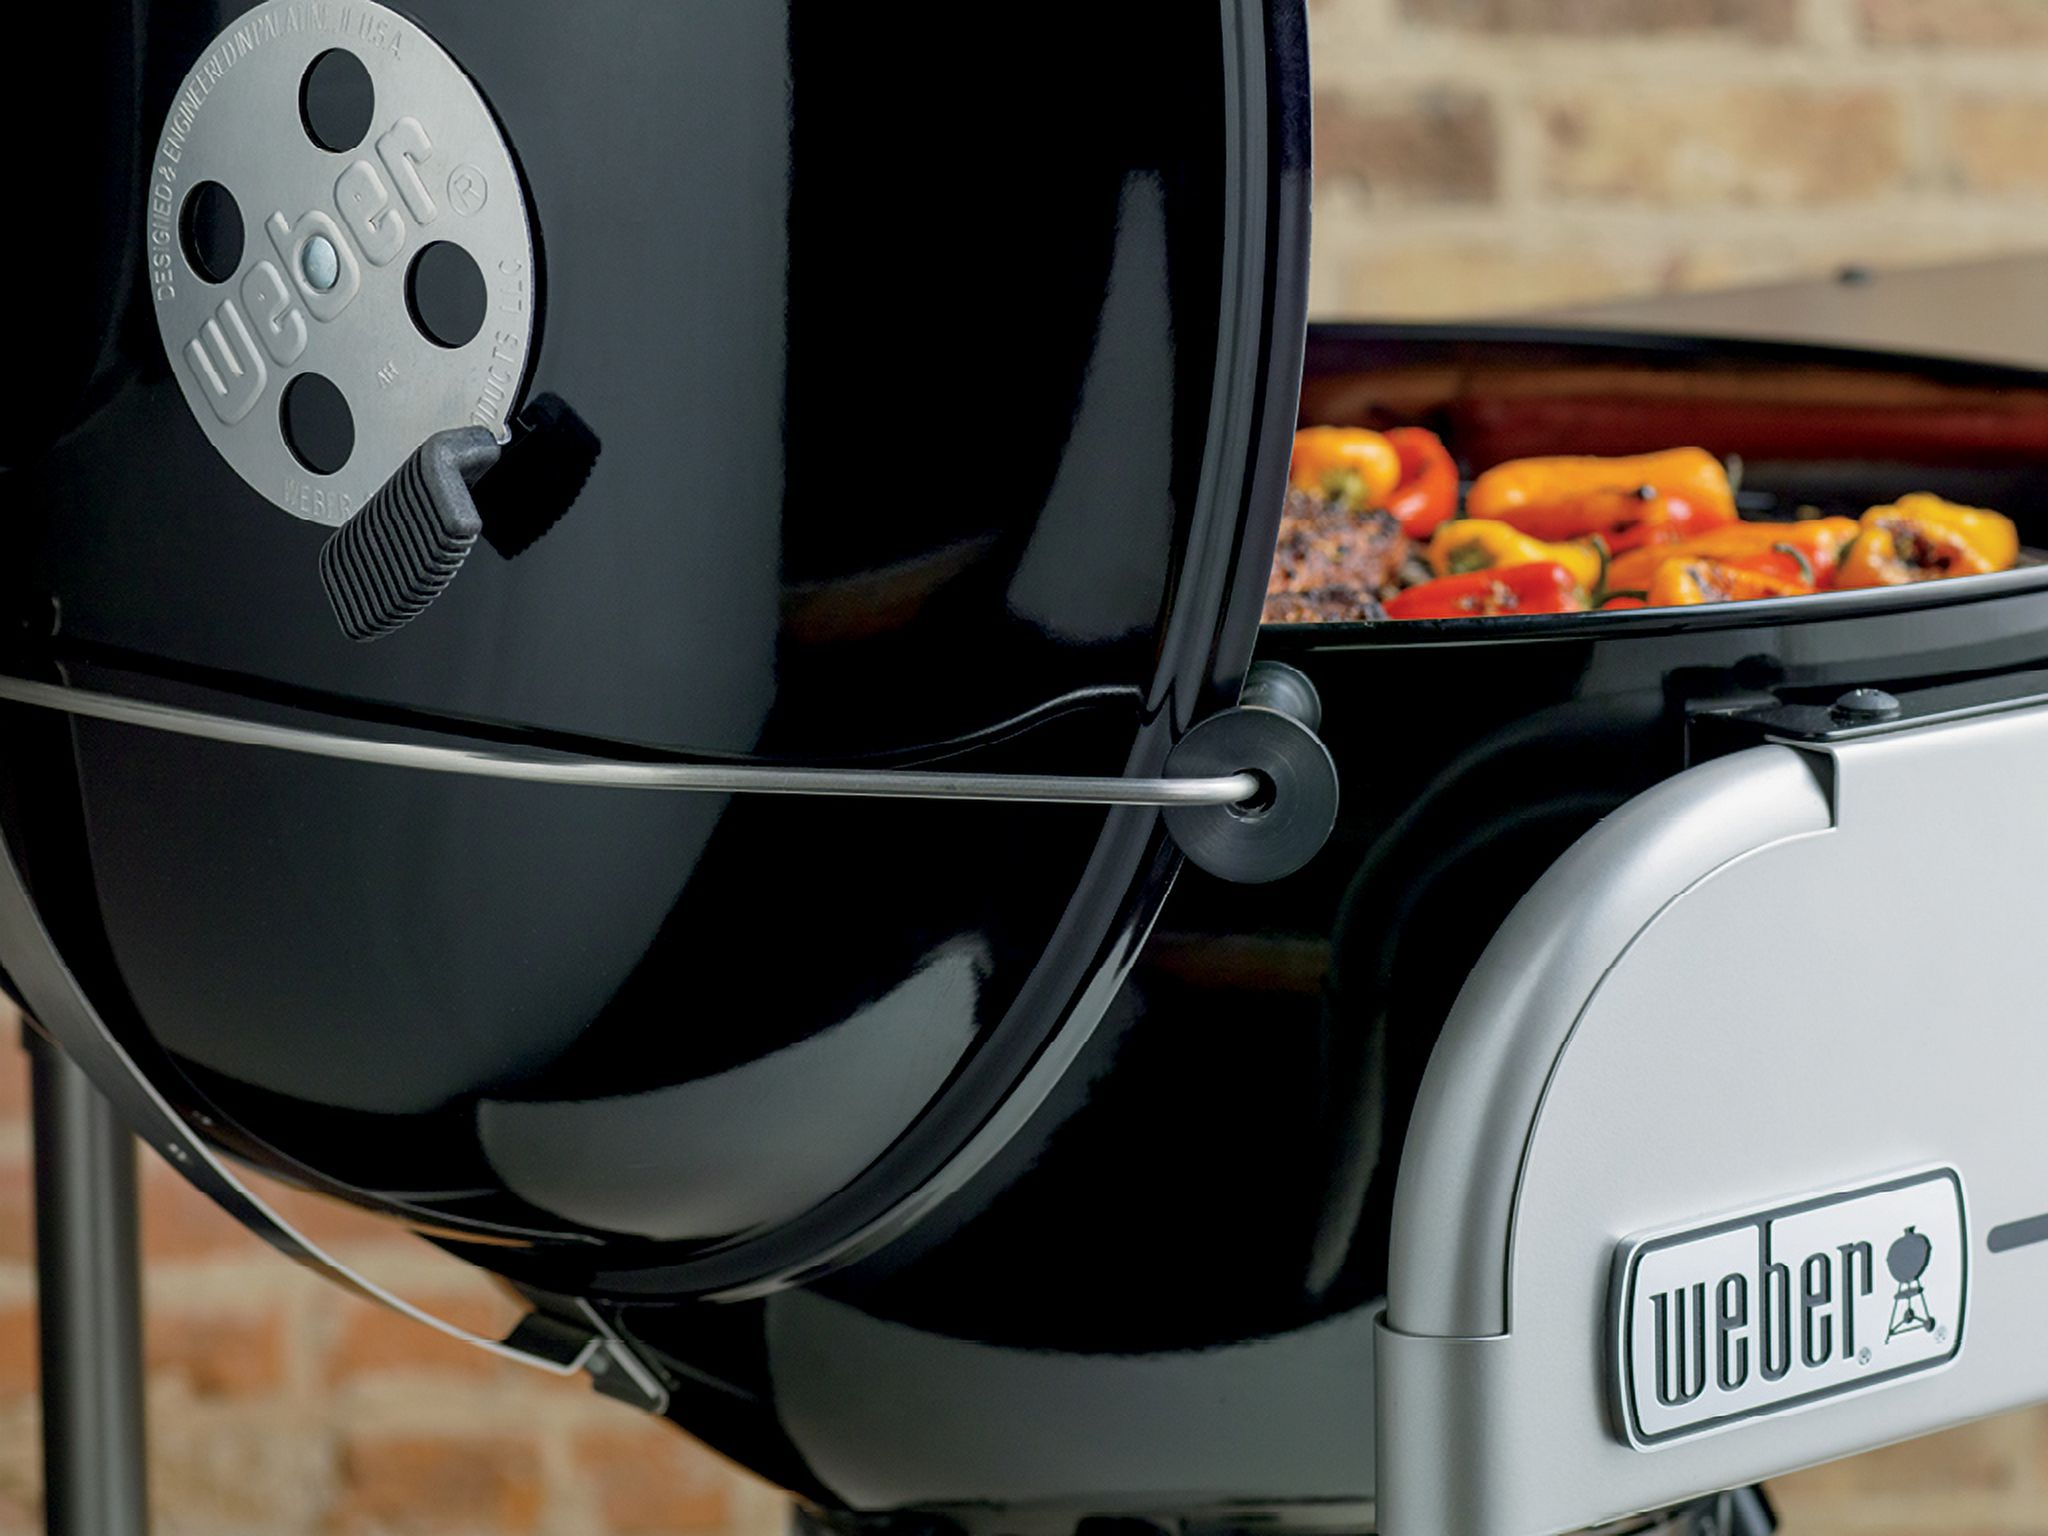 Weber Performer Deluxe 22" Charcoal Grill - image 5 of 17